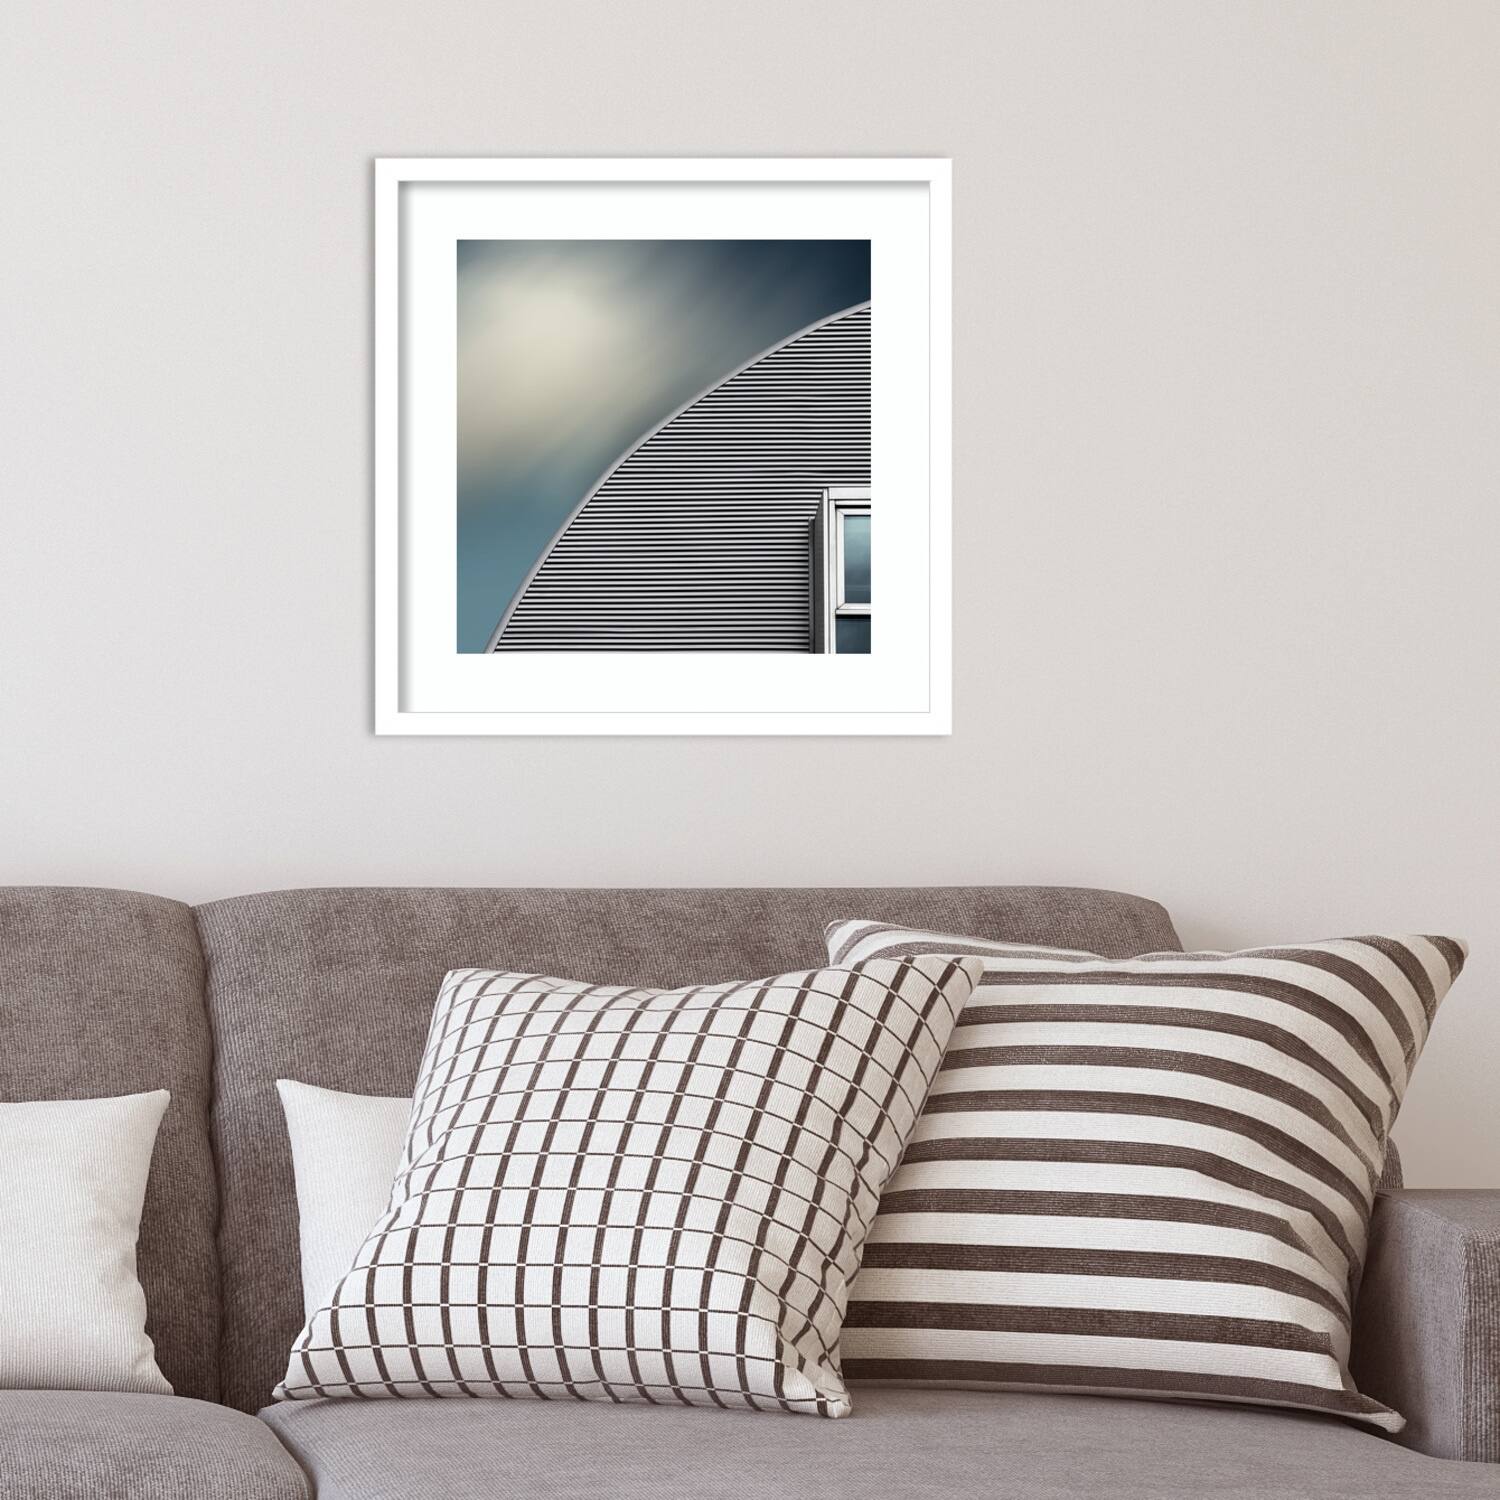 Rounded roof by Gilbert Claes Framed Wall Art Print